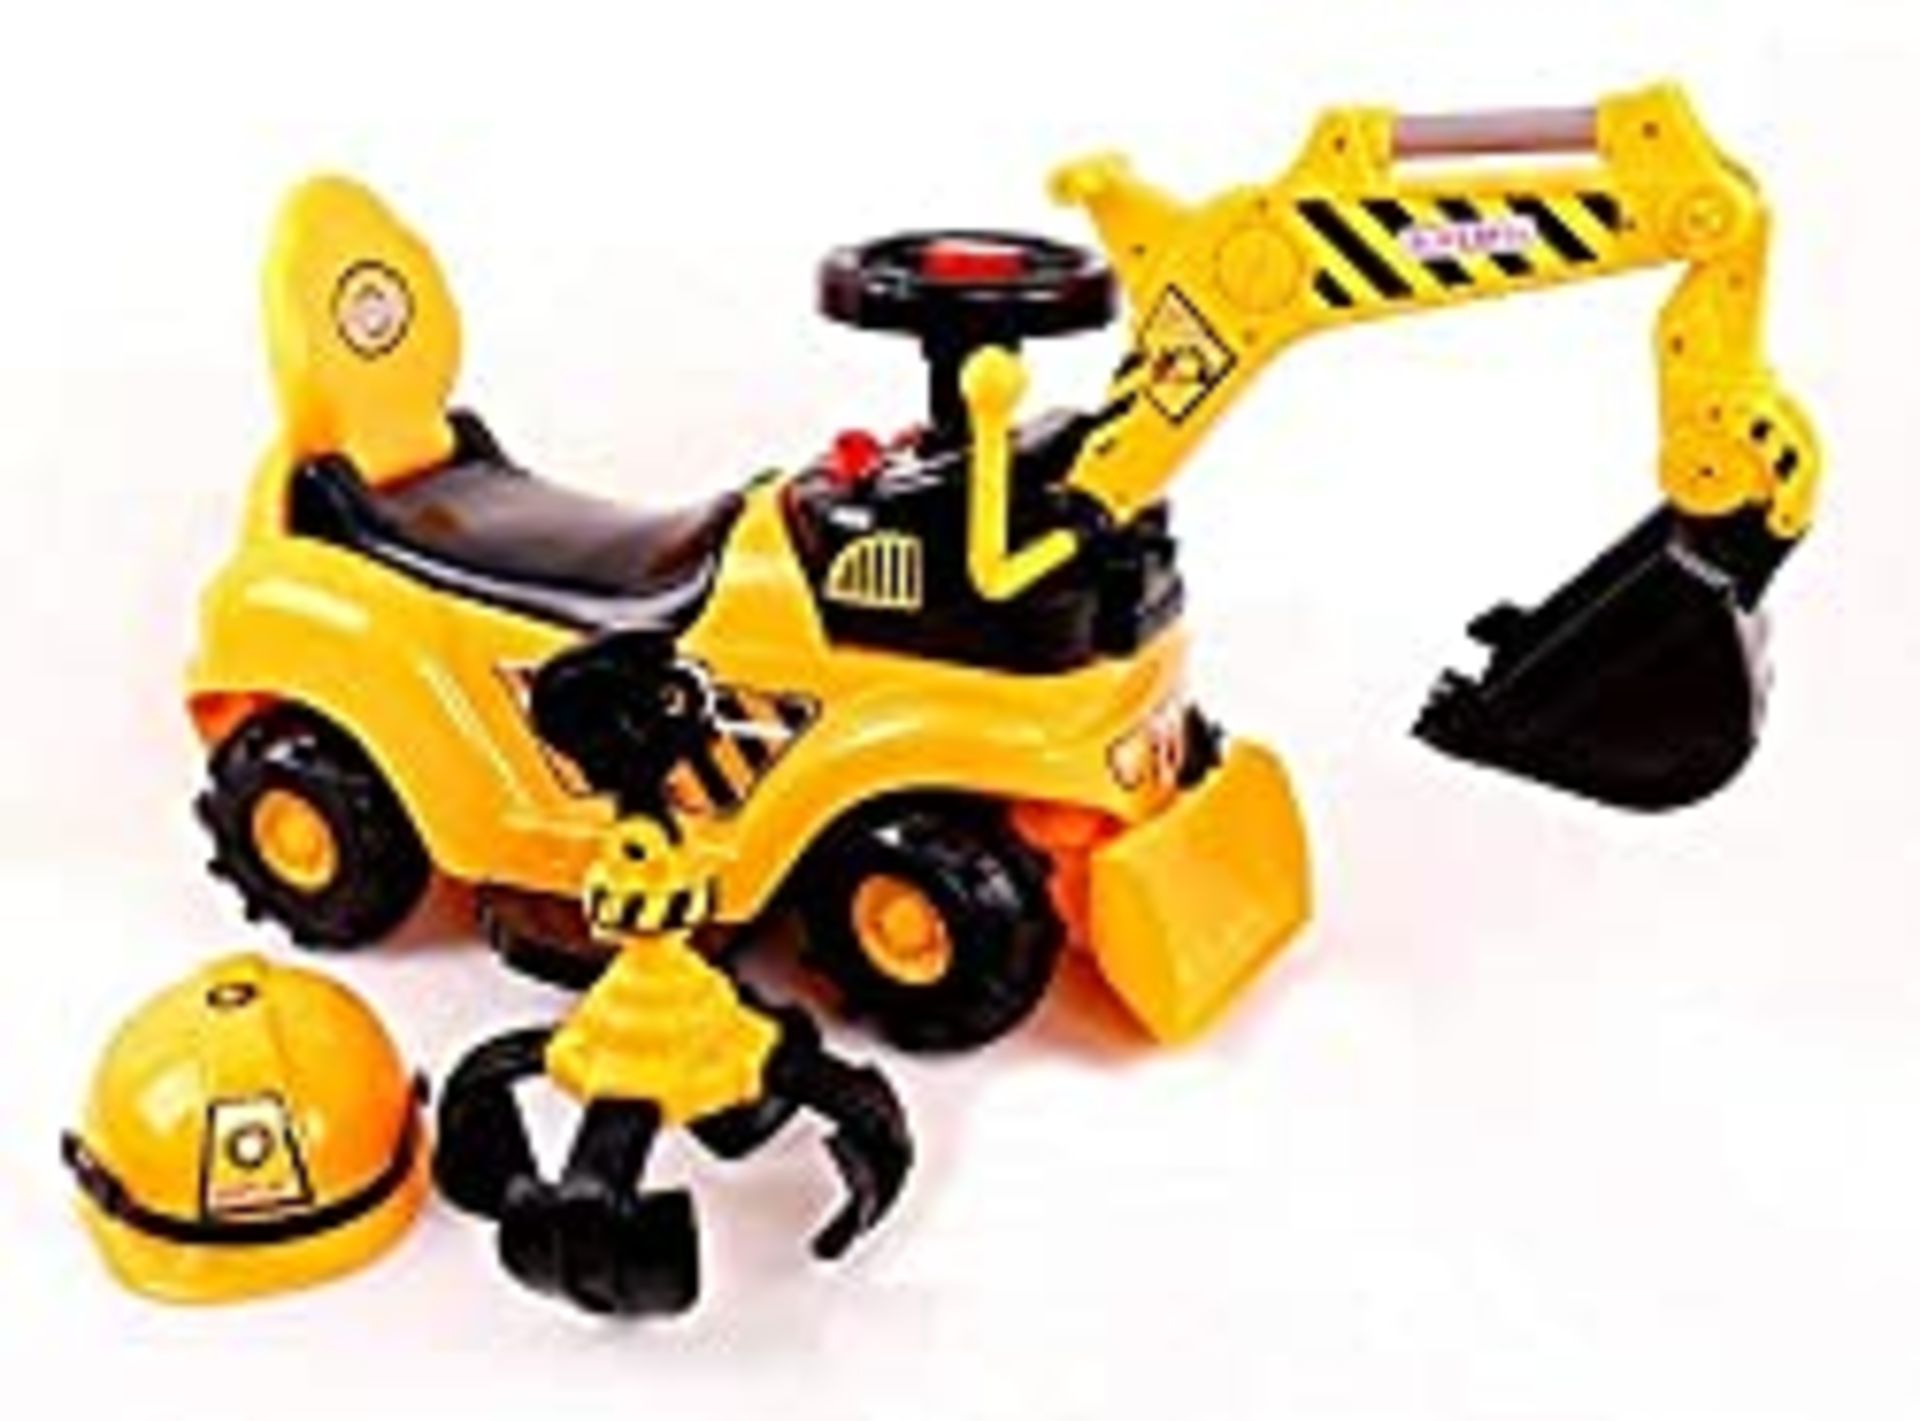 RRP £49.99 Ricco 2 in 1 Ride On Toy Digger Excavator Grabber Bulldozer with Helmet